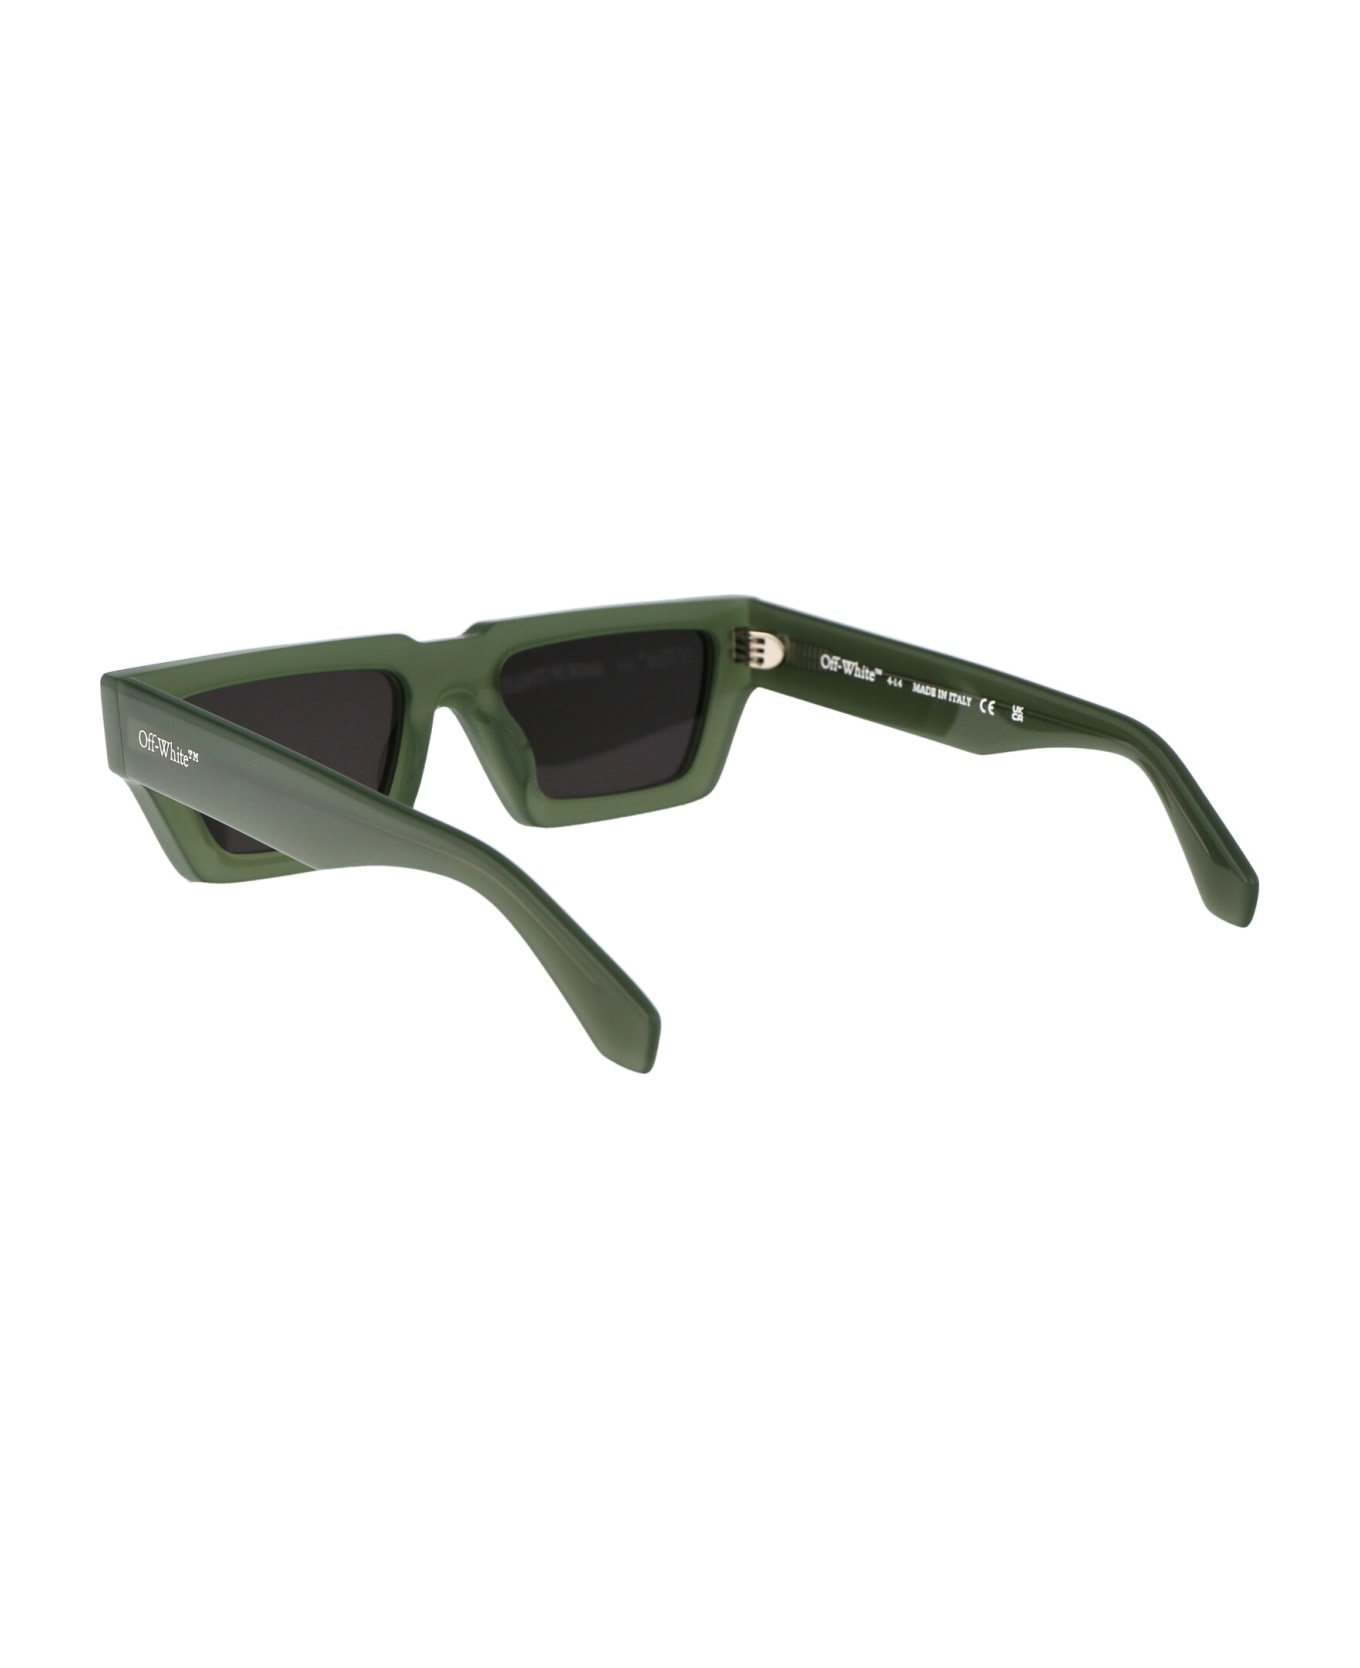 Off-White Manchester Sunglasses - 5707 SAGE GREEN